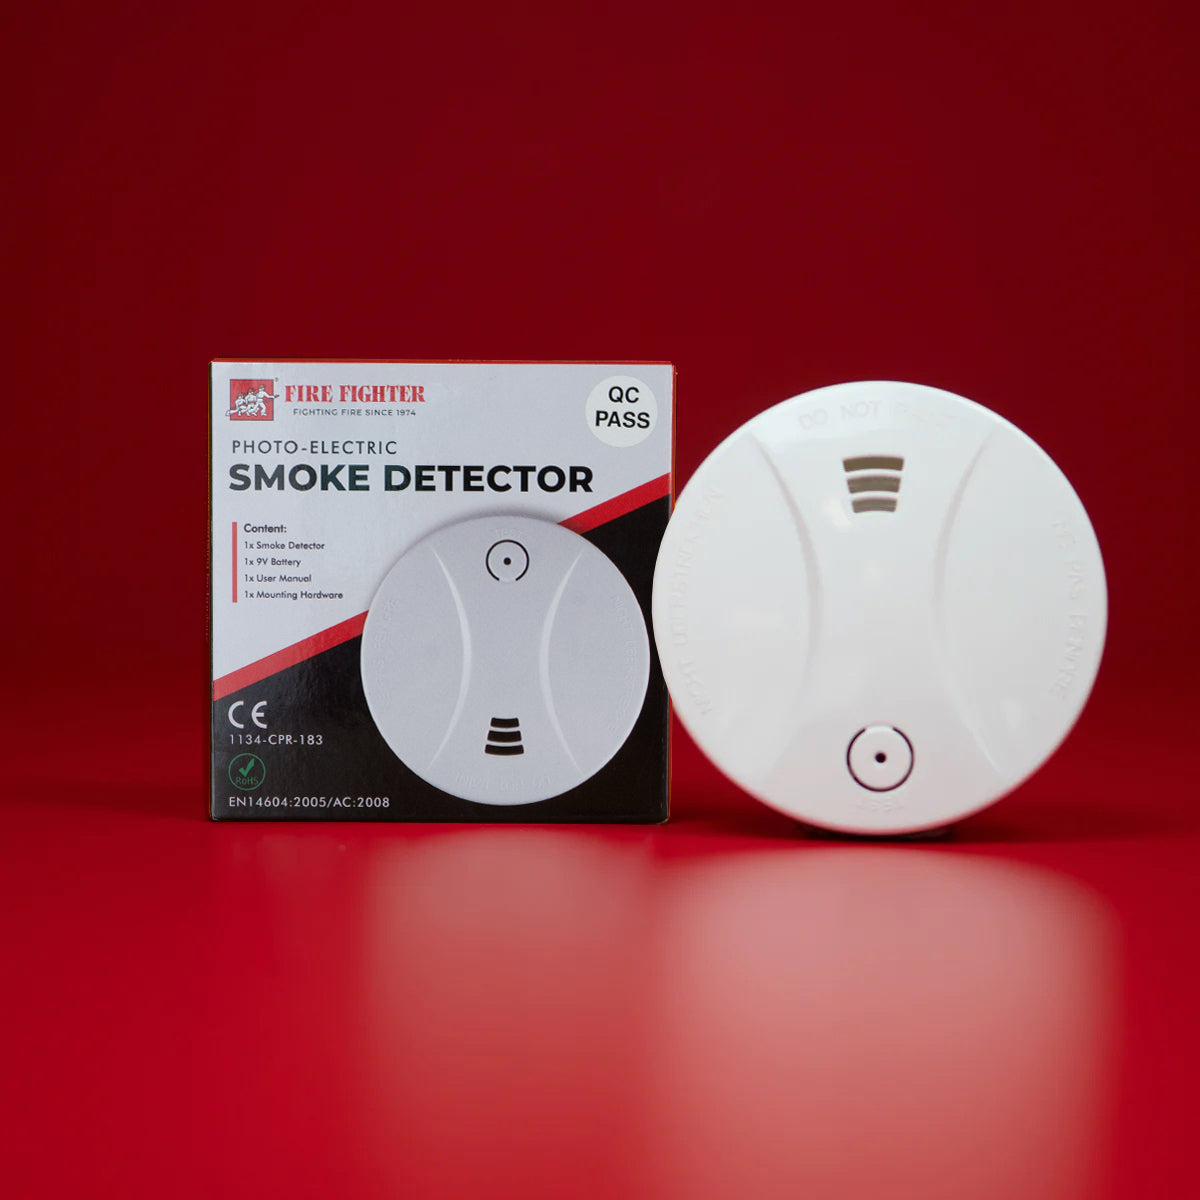 Heat Detectors vs Smoke Alarms in Malaysia: How Are They Different?